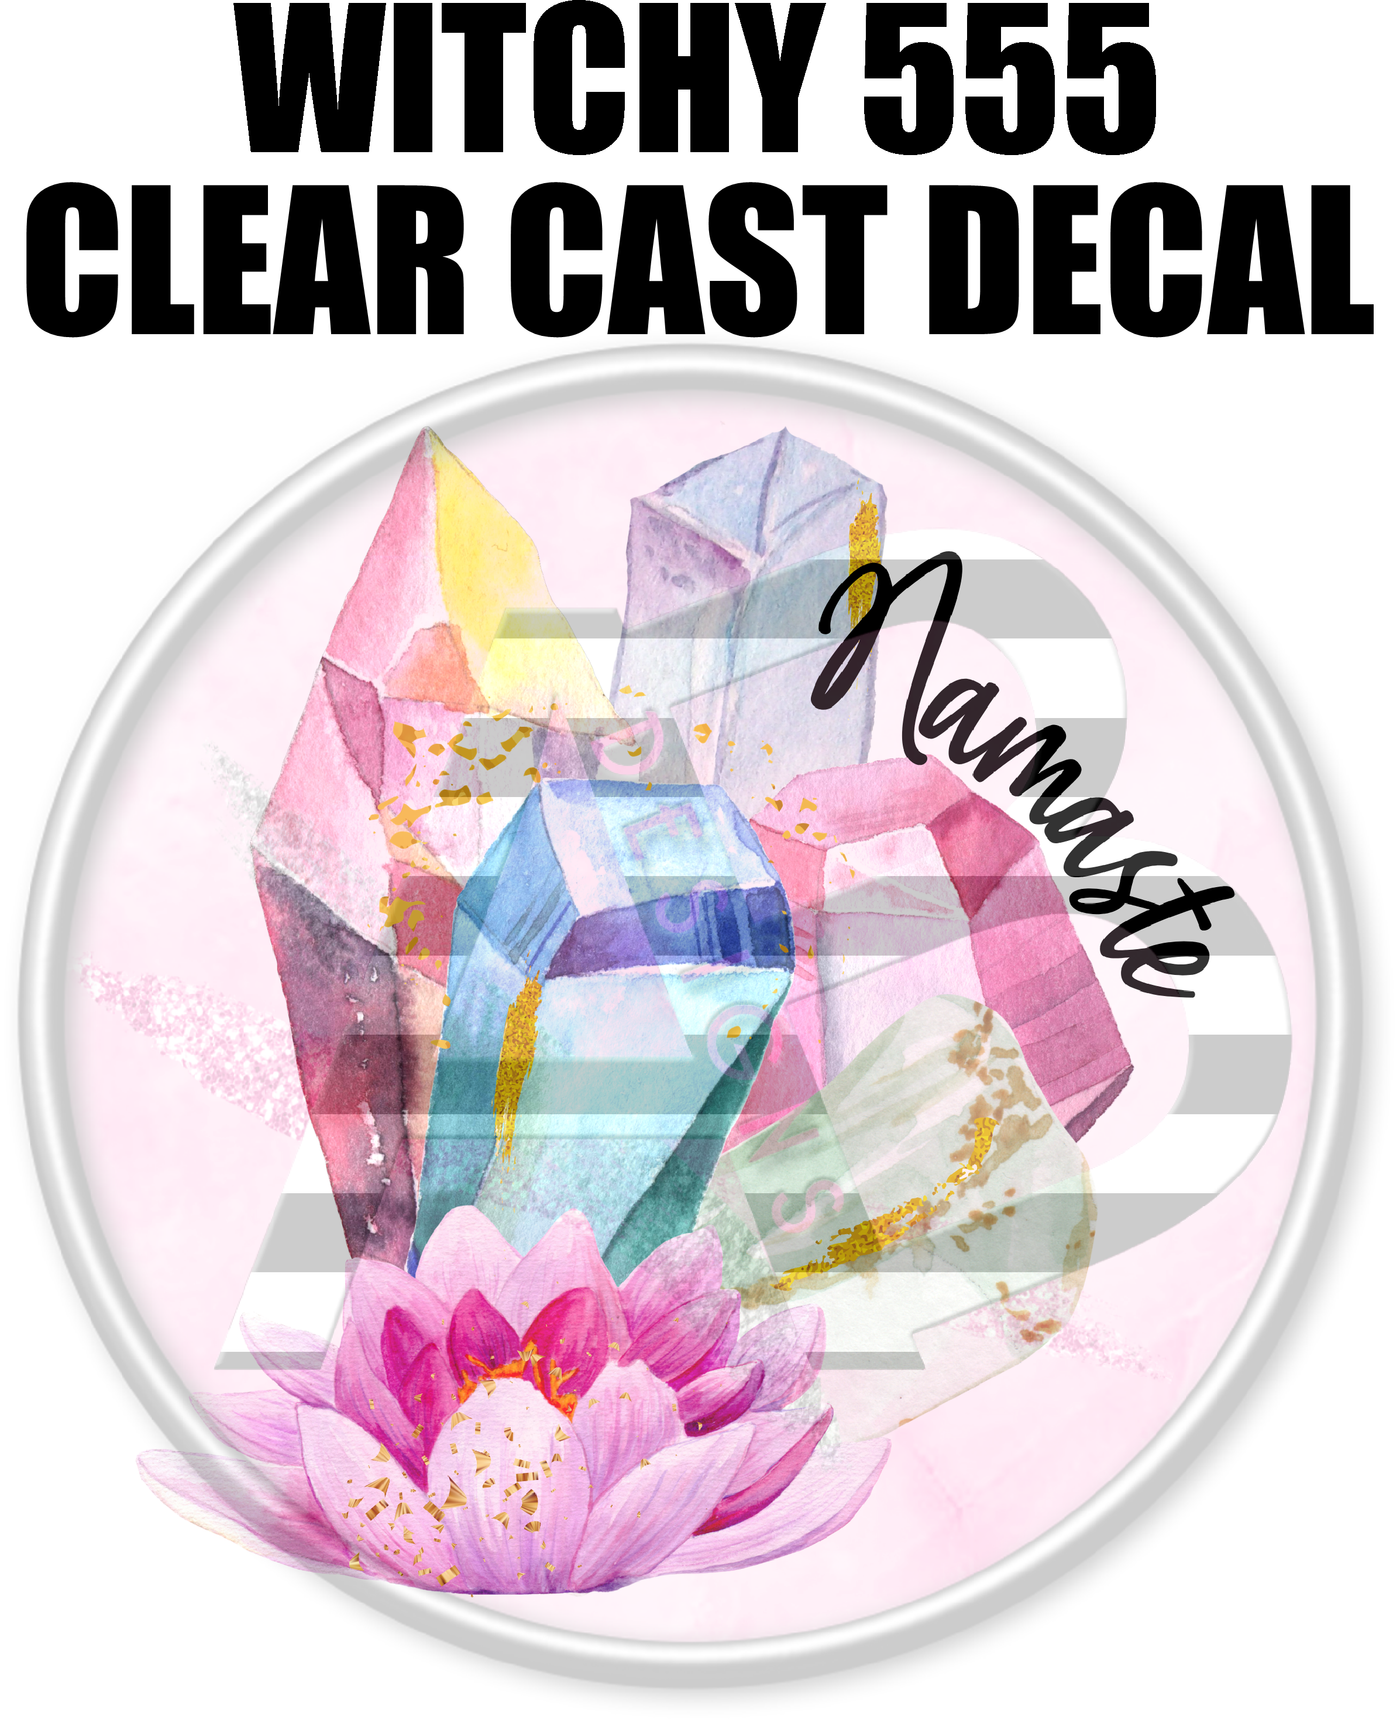 Witchy 555 - Clear Cast Decal